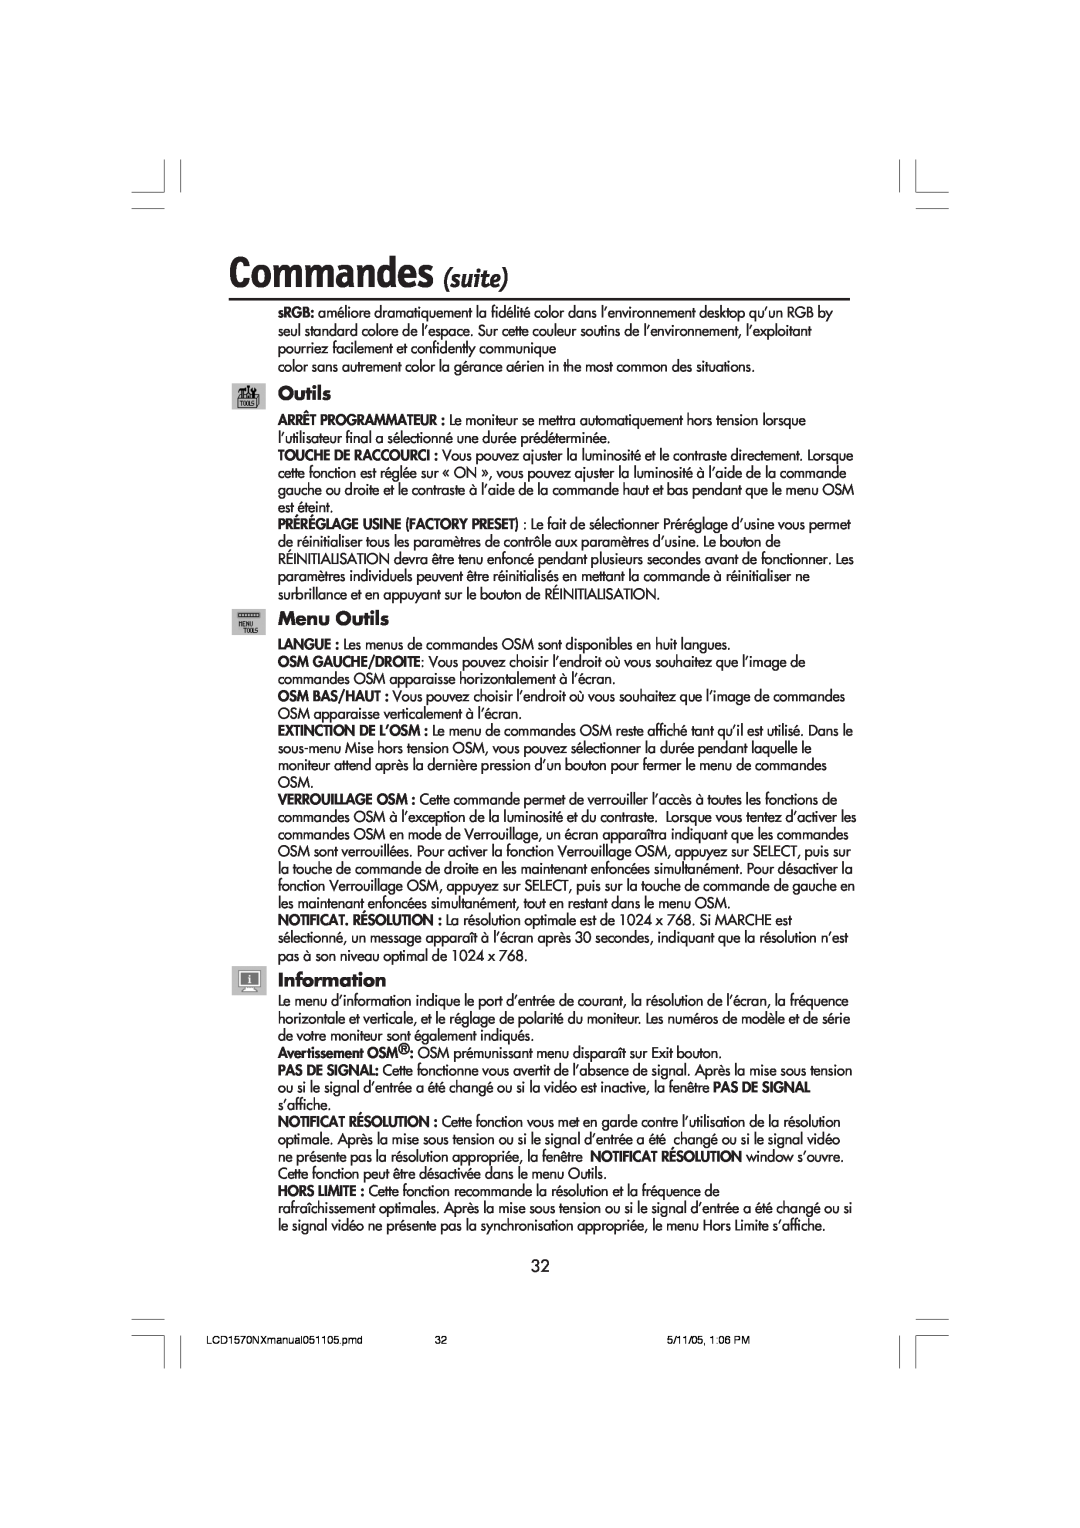 NEC LCD1570NX user manual Commandes suite, Menu Outils, Information 